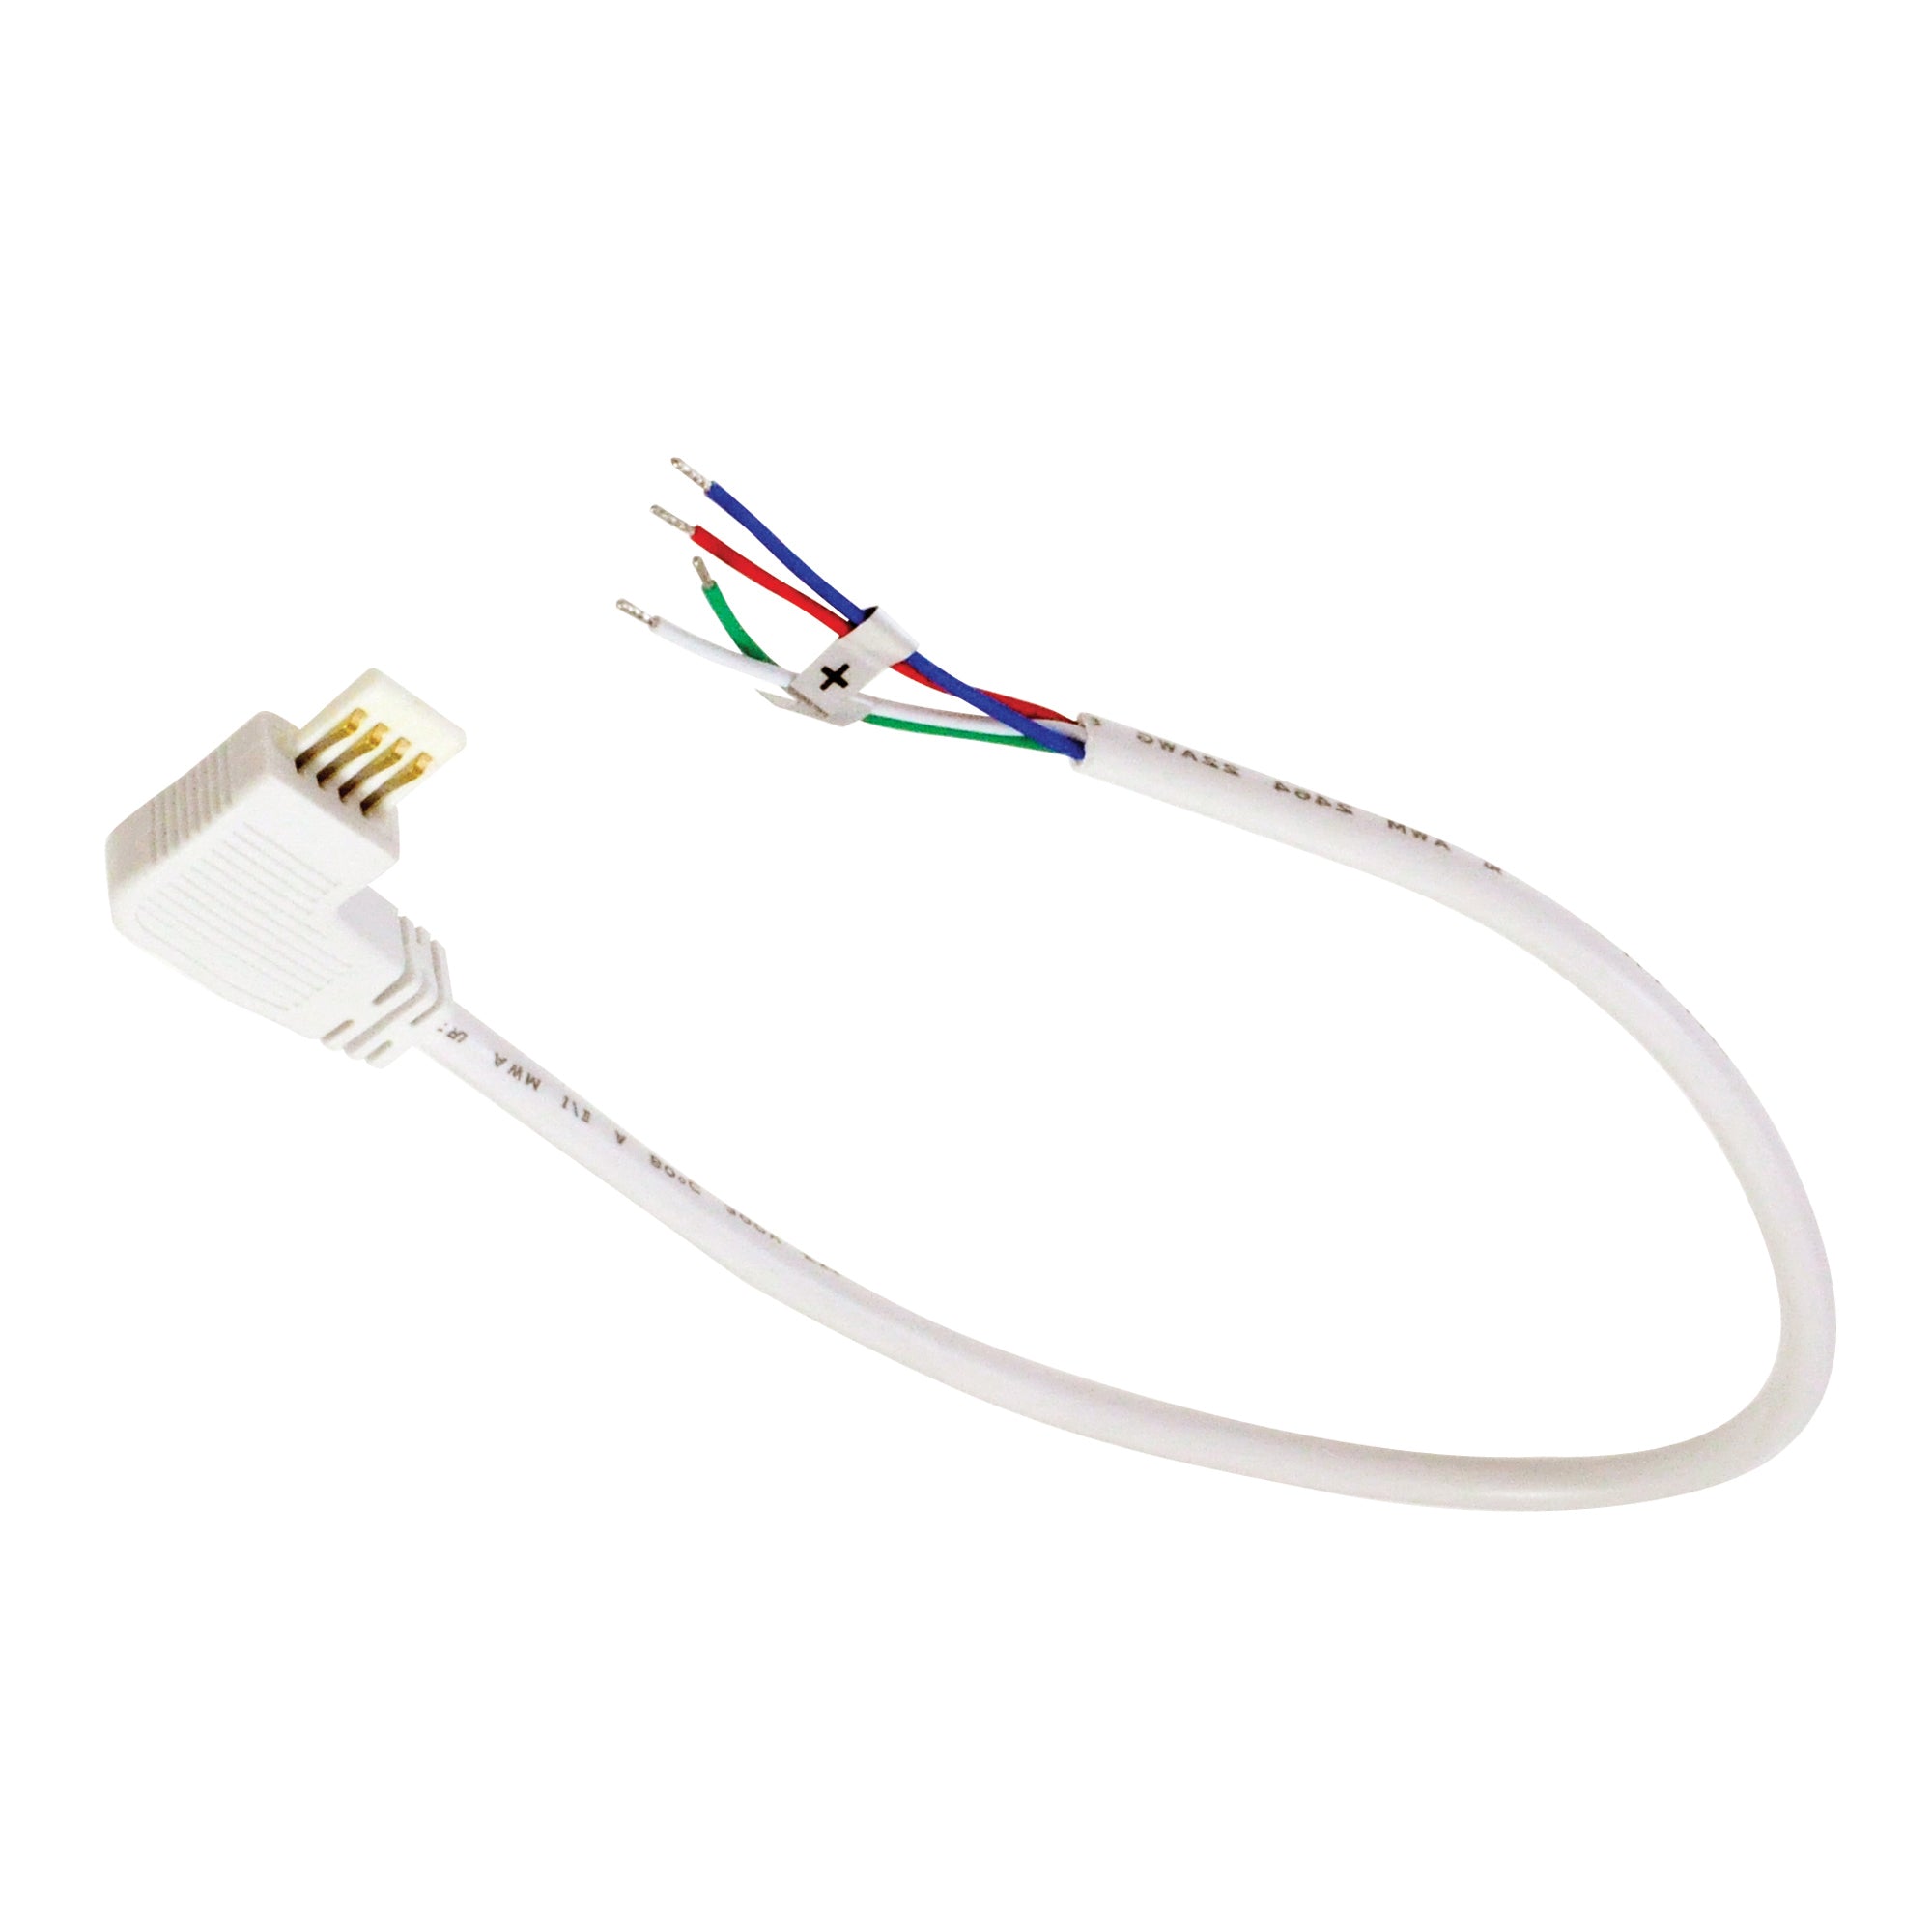 Nora Lighting NAL-811/12LW - Accent / Undercabinet - 12 Inch Side Power Line Cable Open Wire for Lightbar Silk, Left, White